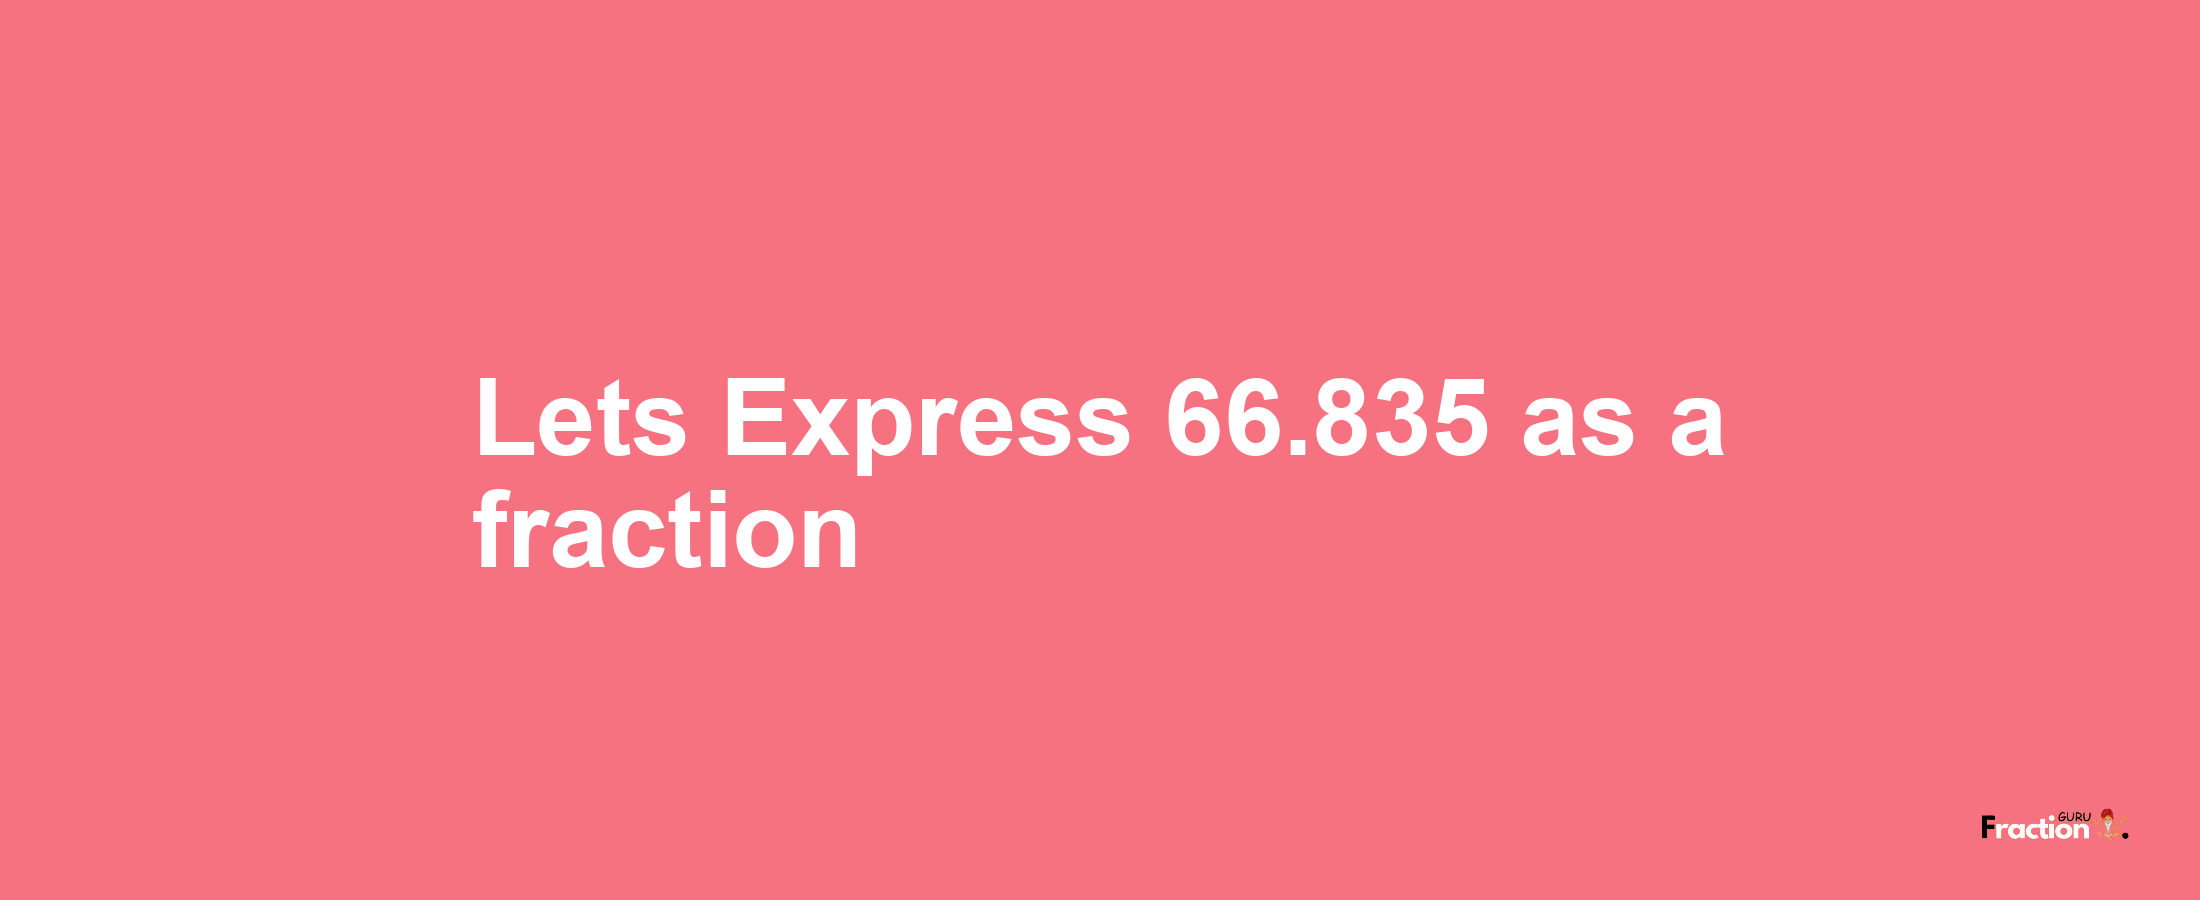 Lets Express 66.835 as afraction